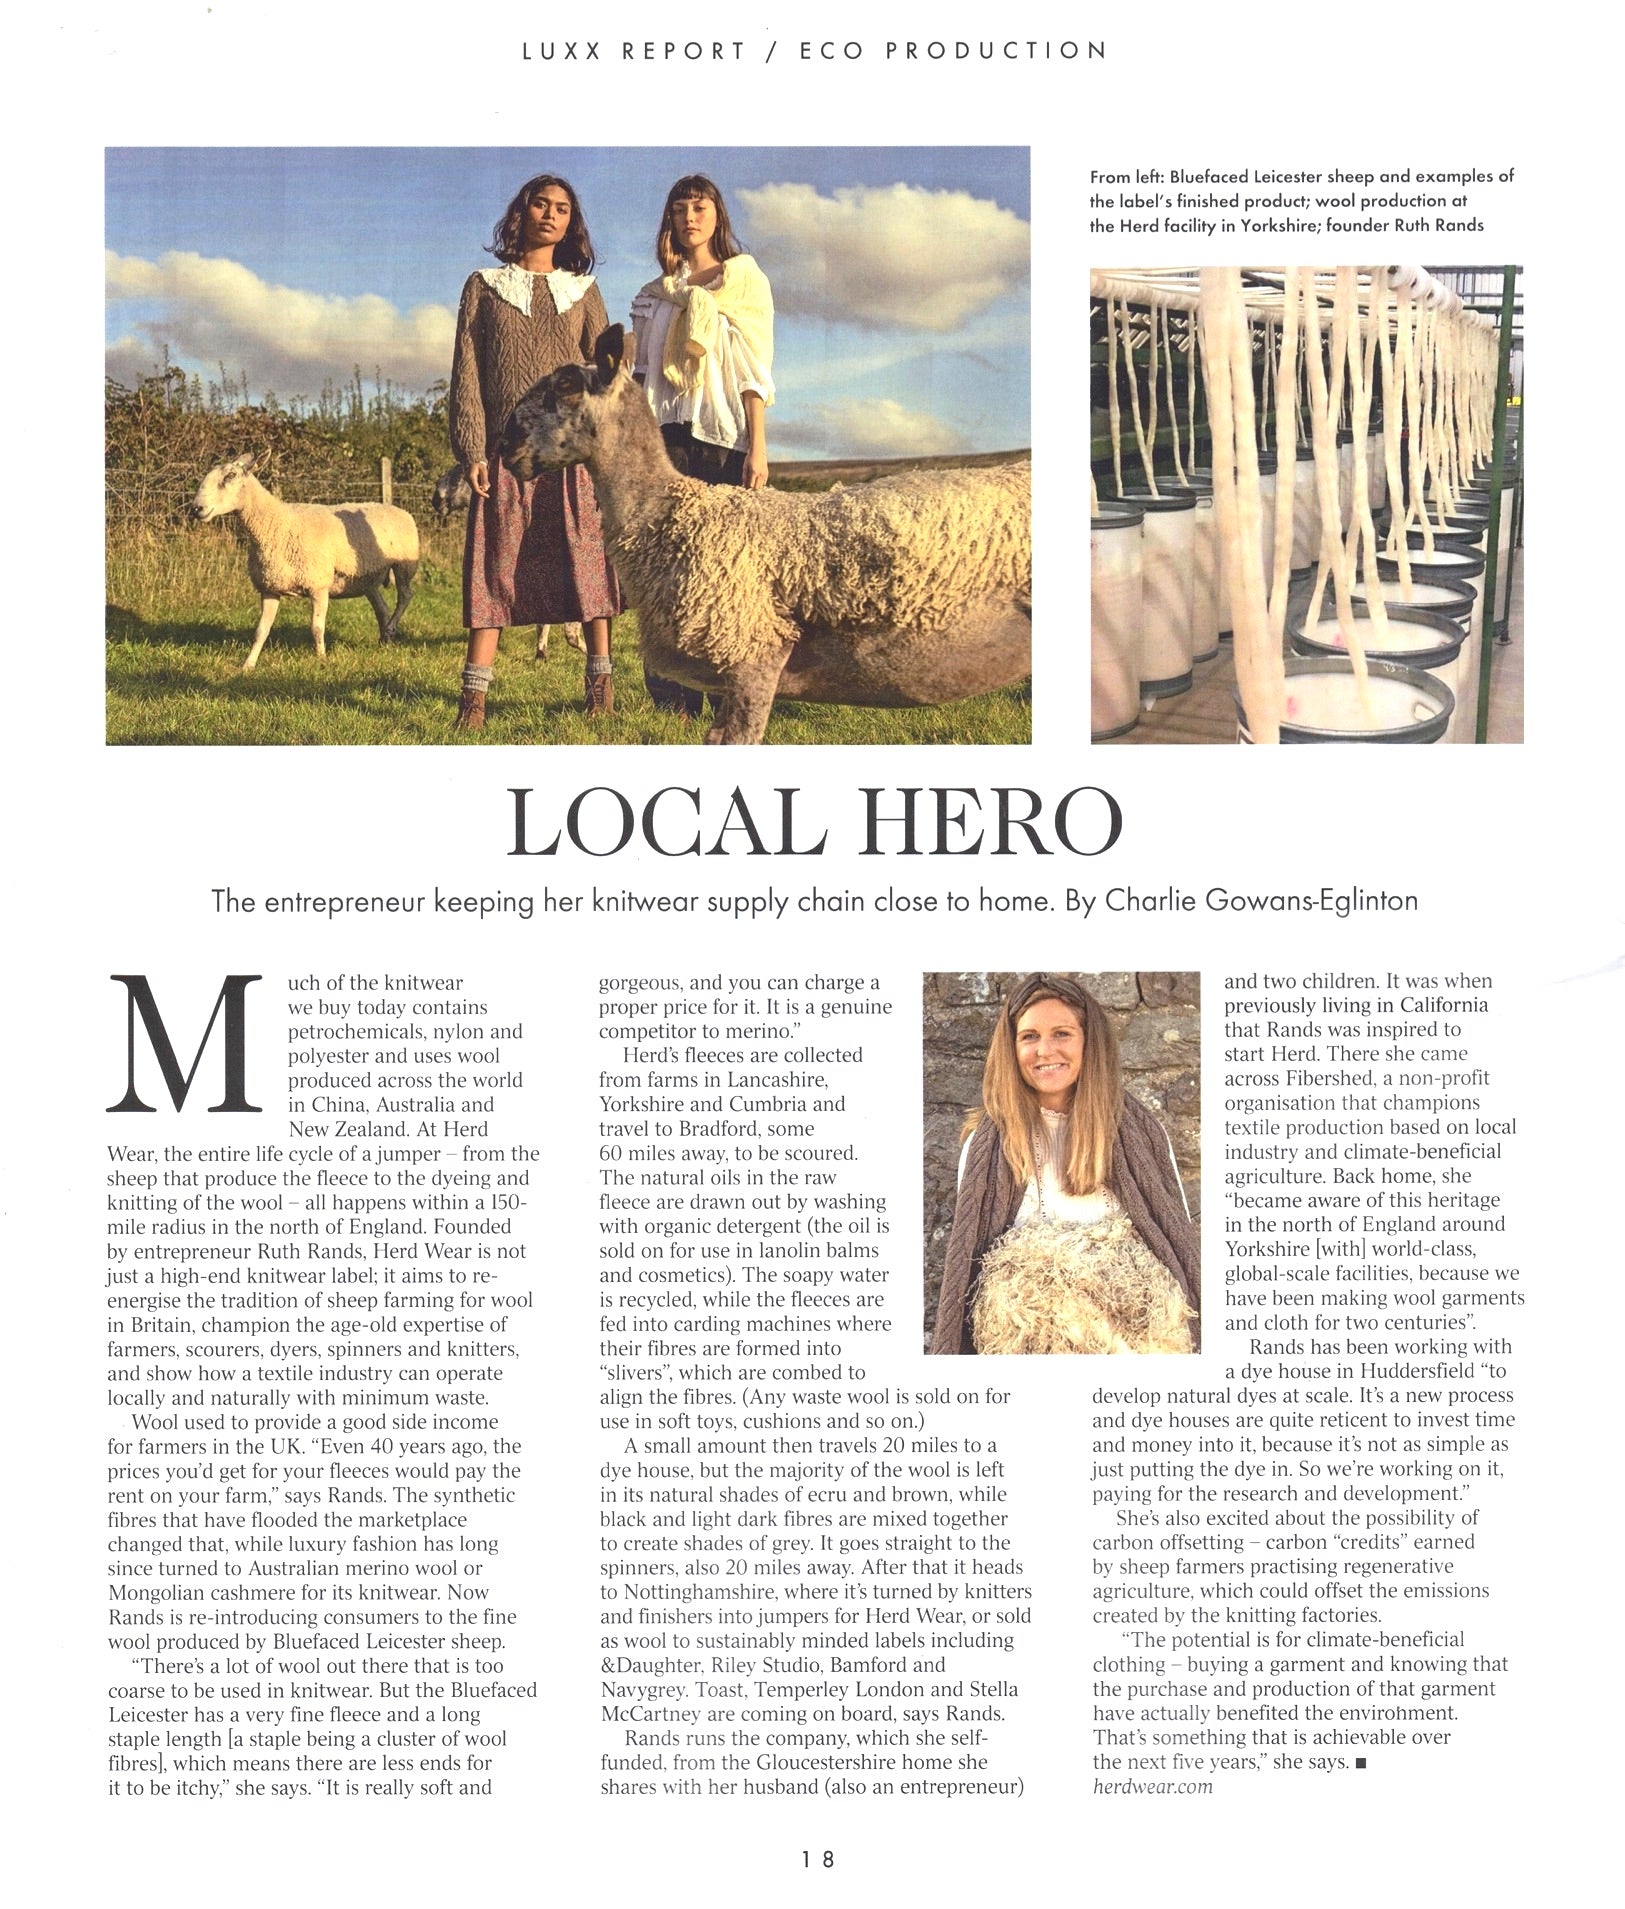 Local Hero by The Times LUXX